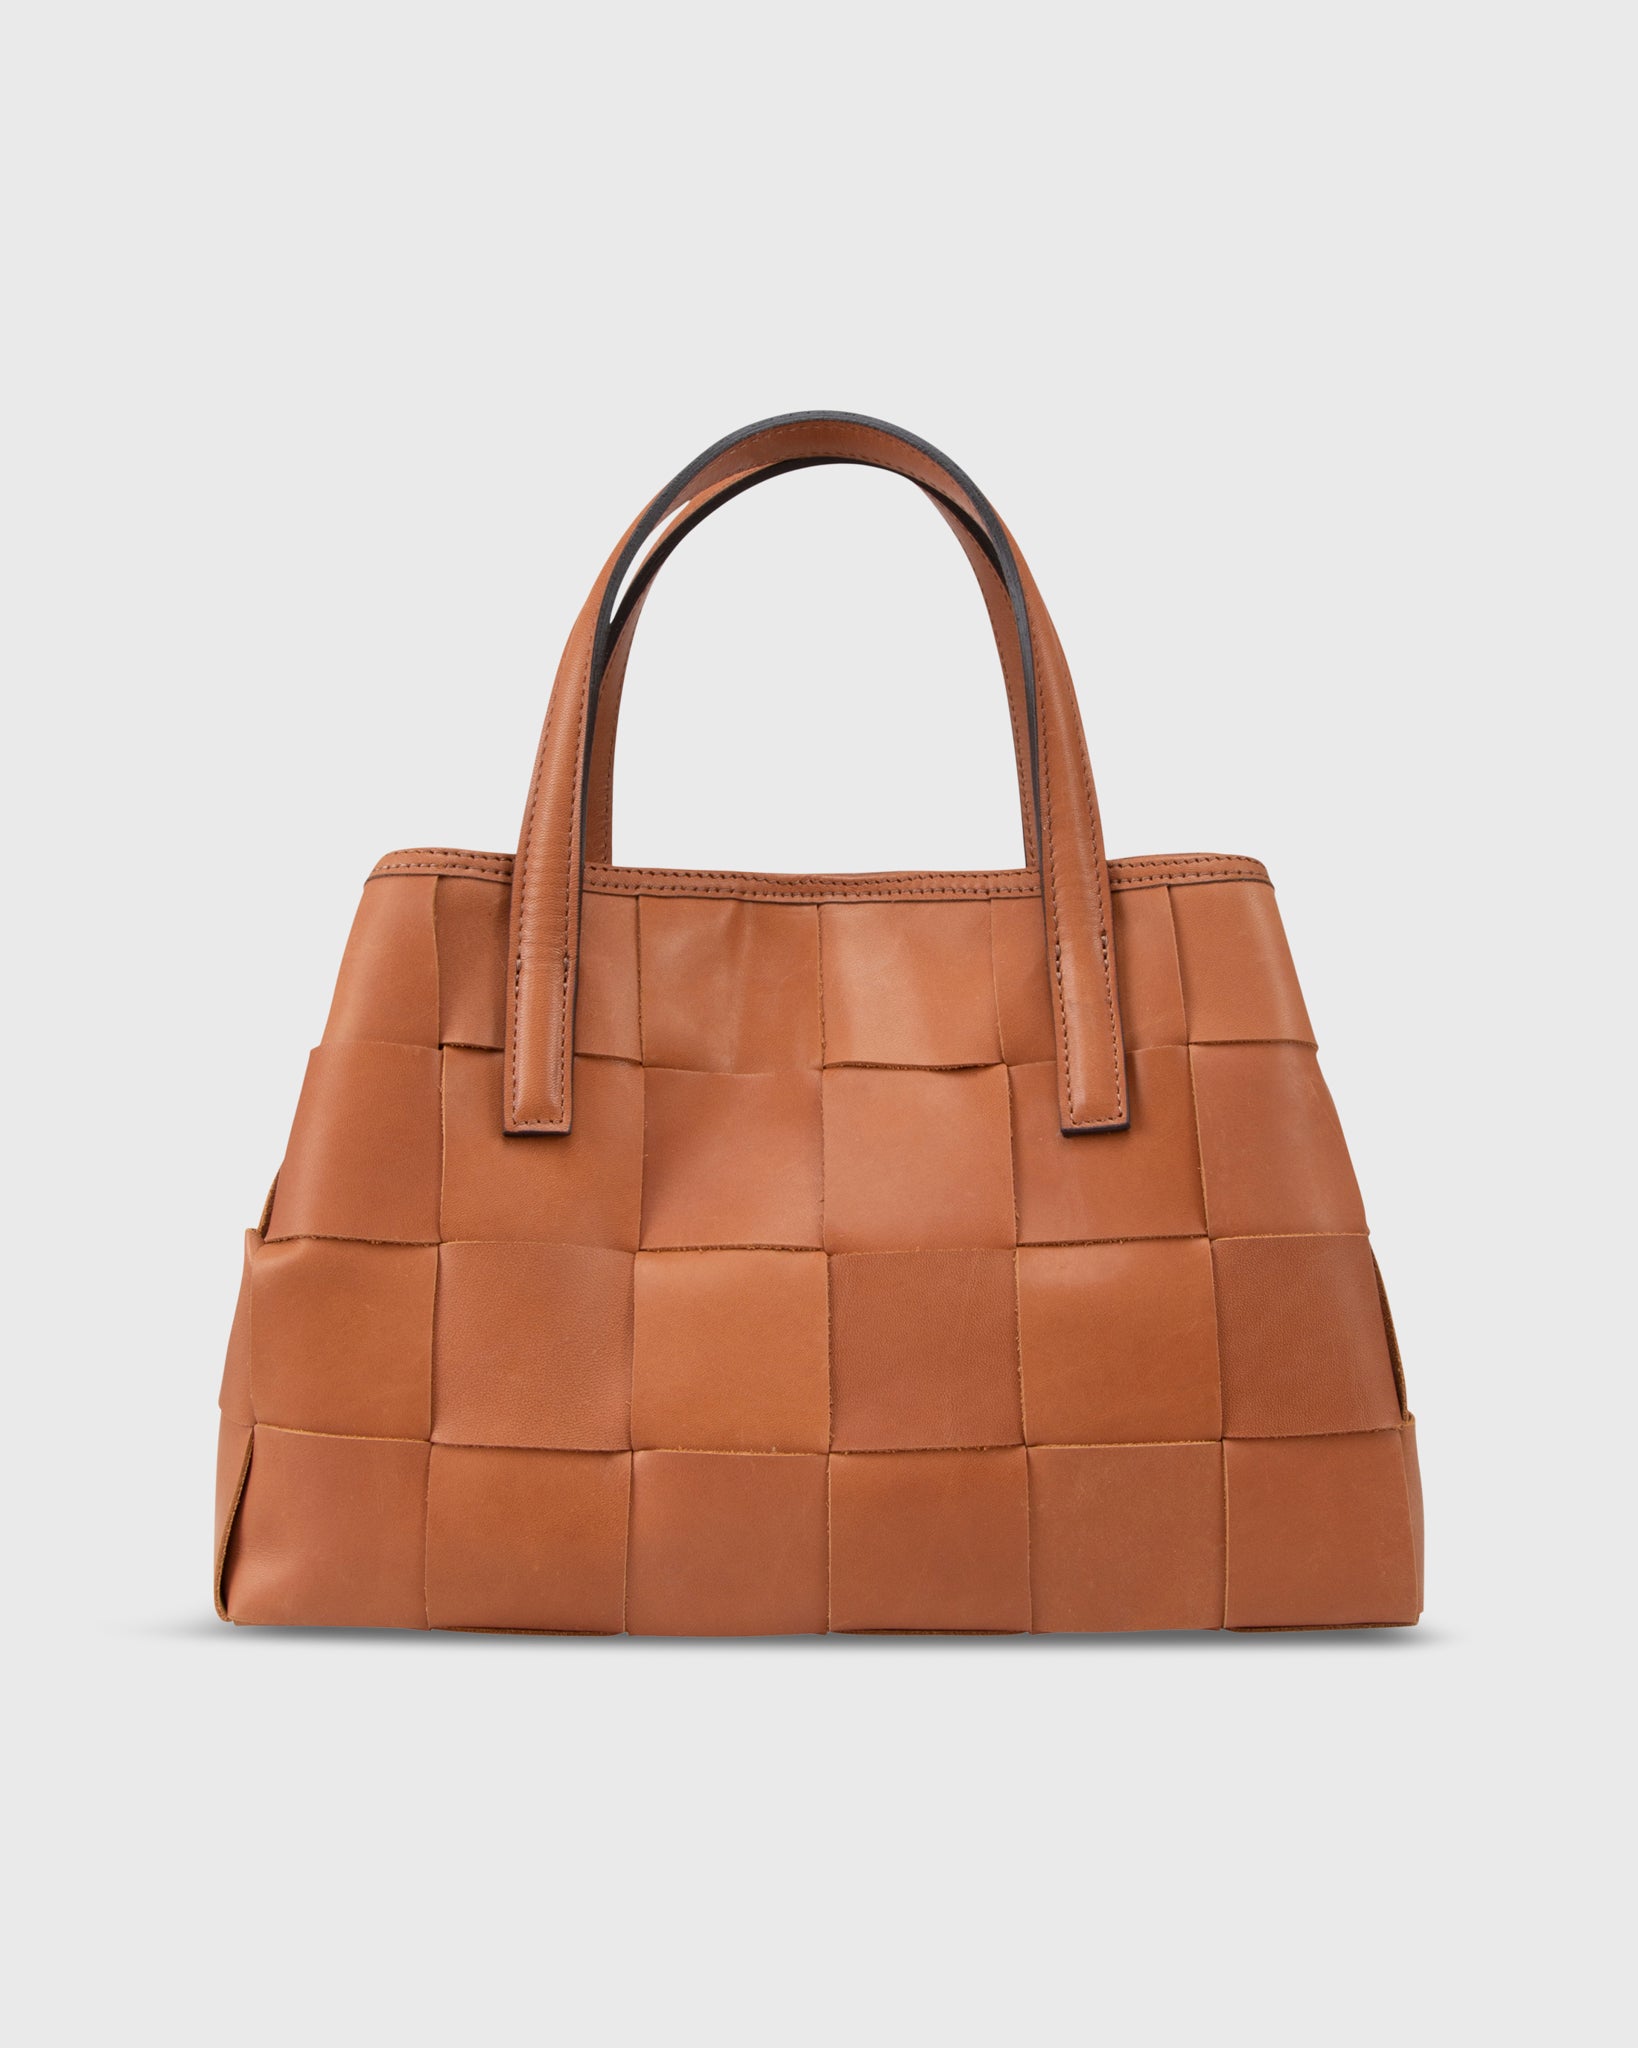 Wide Woven Satchel Bag in Biscuit Leather